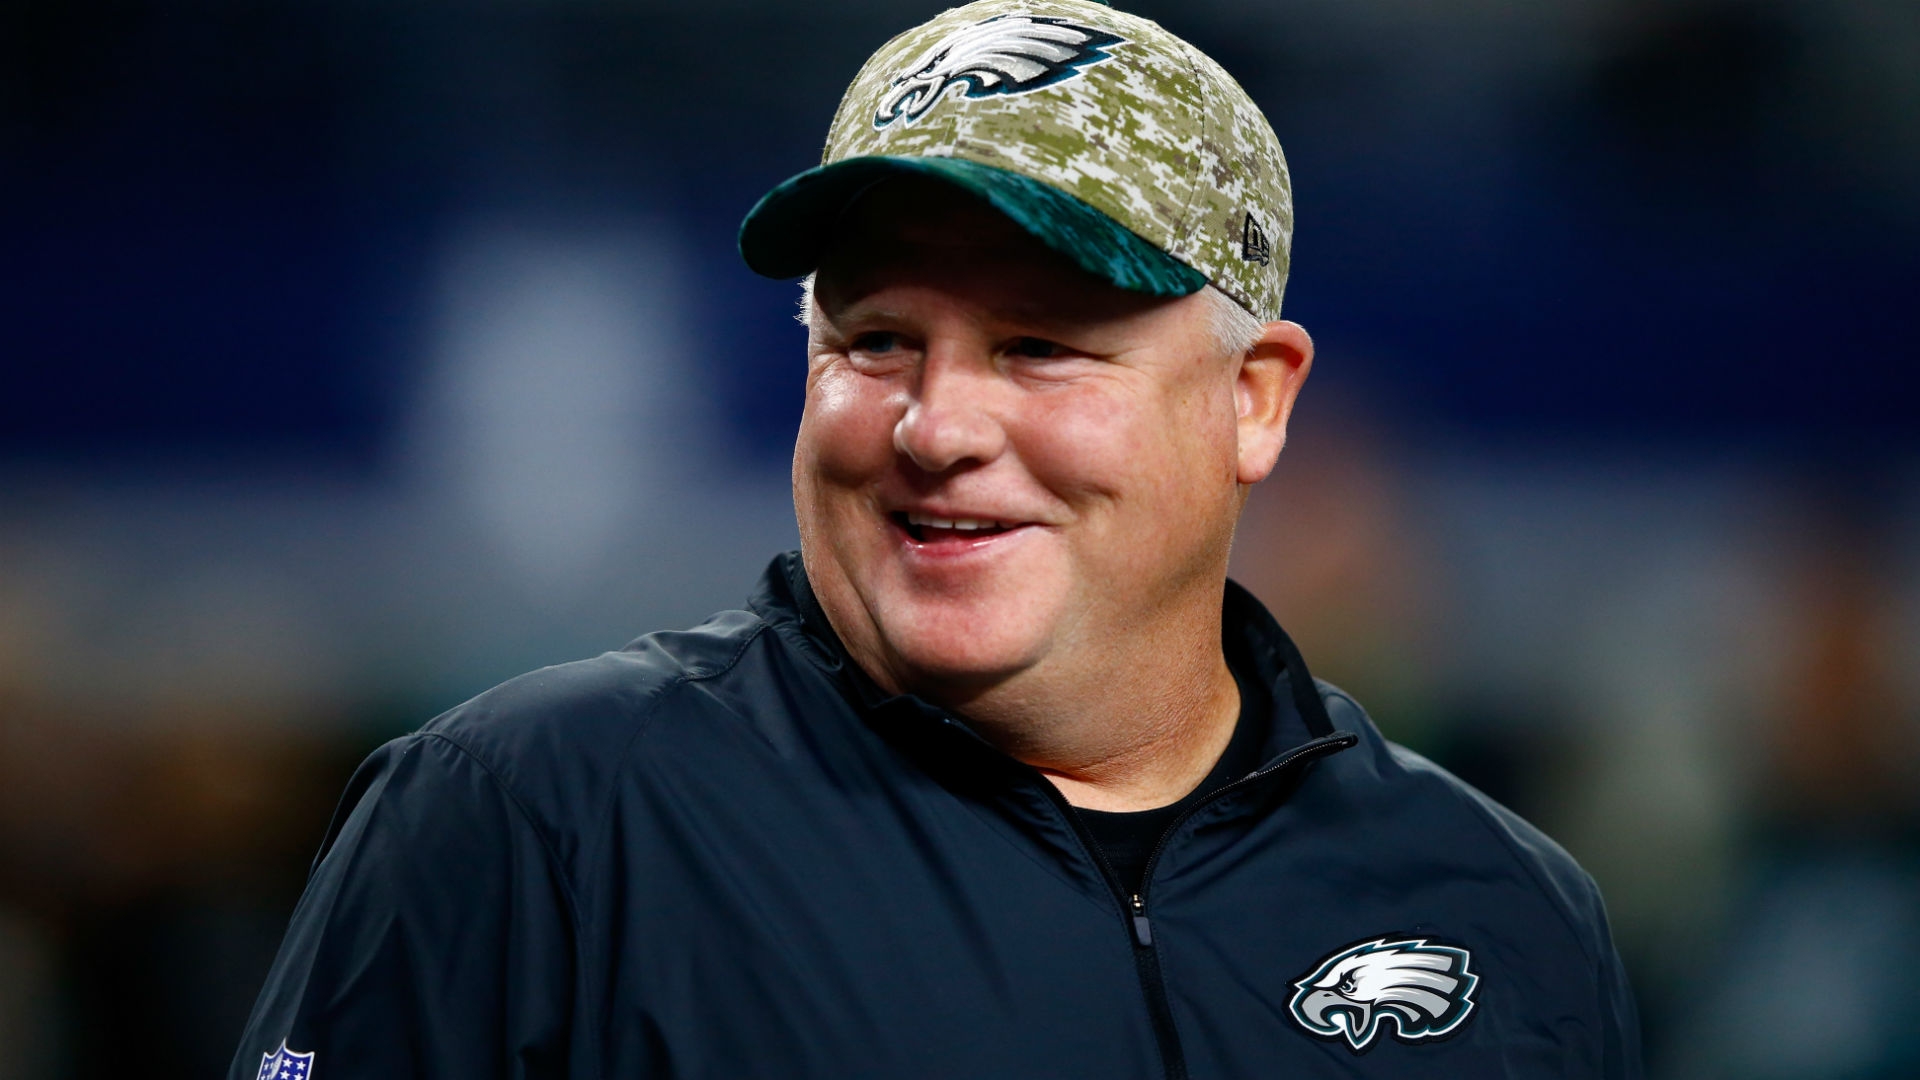 The wrong Chip Kelly gets angry messages from Eagles fans